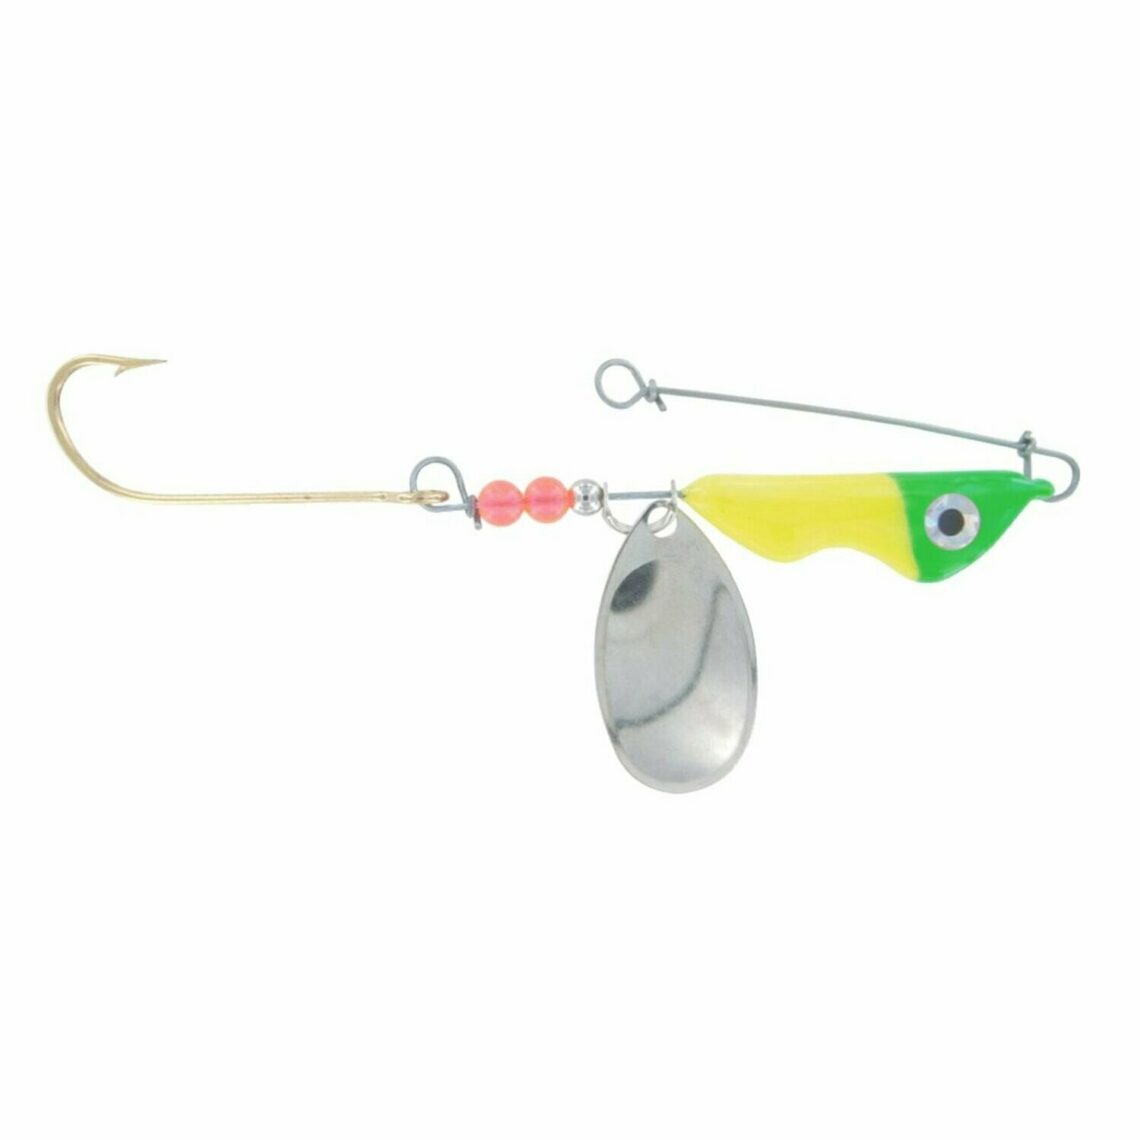  Carlson Erie Dearie Original White and Red Fishing Lure,  3.4-Ounce : Fishing Spinners And Spinnerbaits : Sports & Outdoors